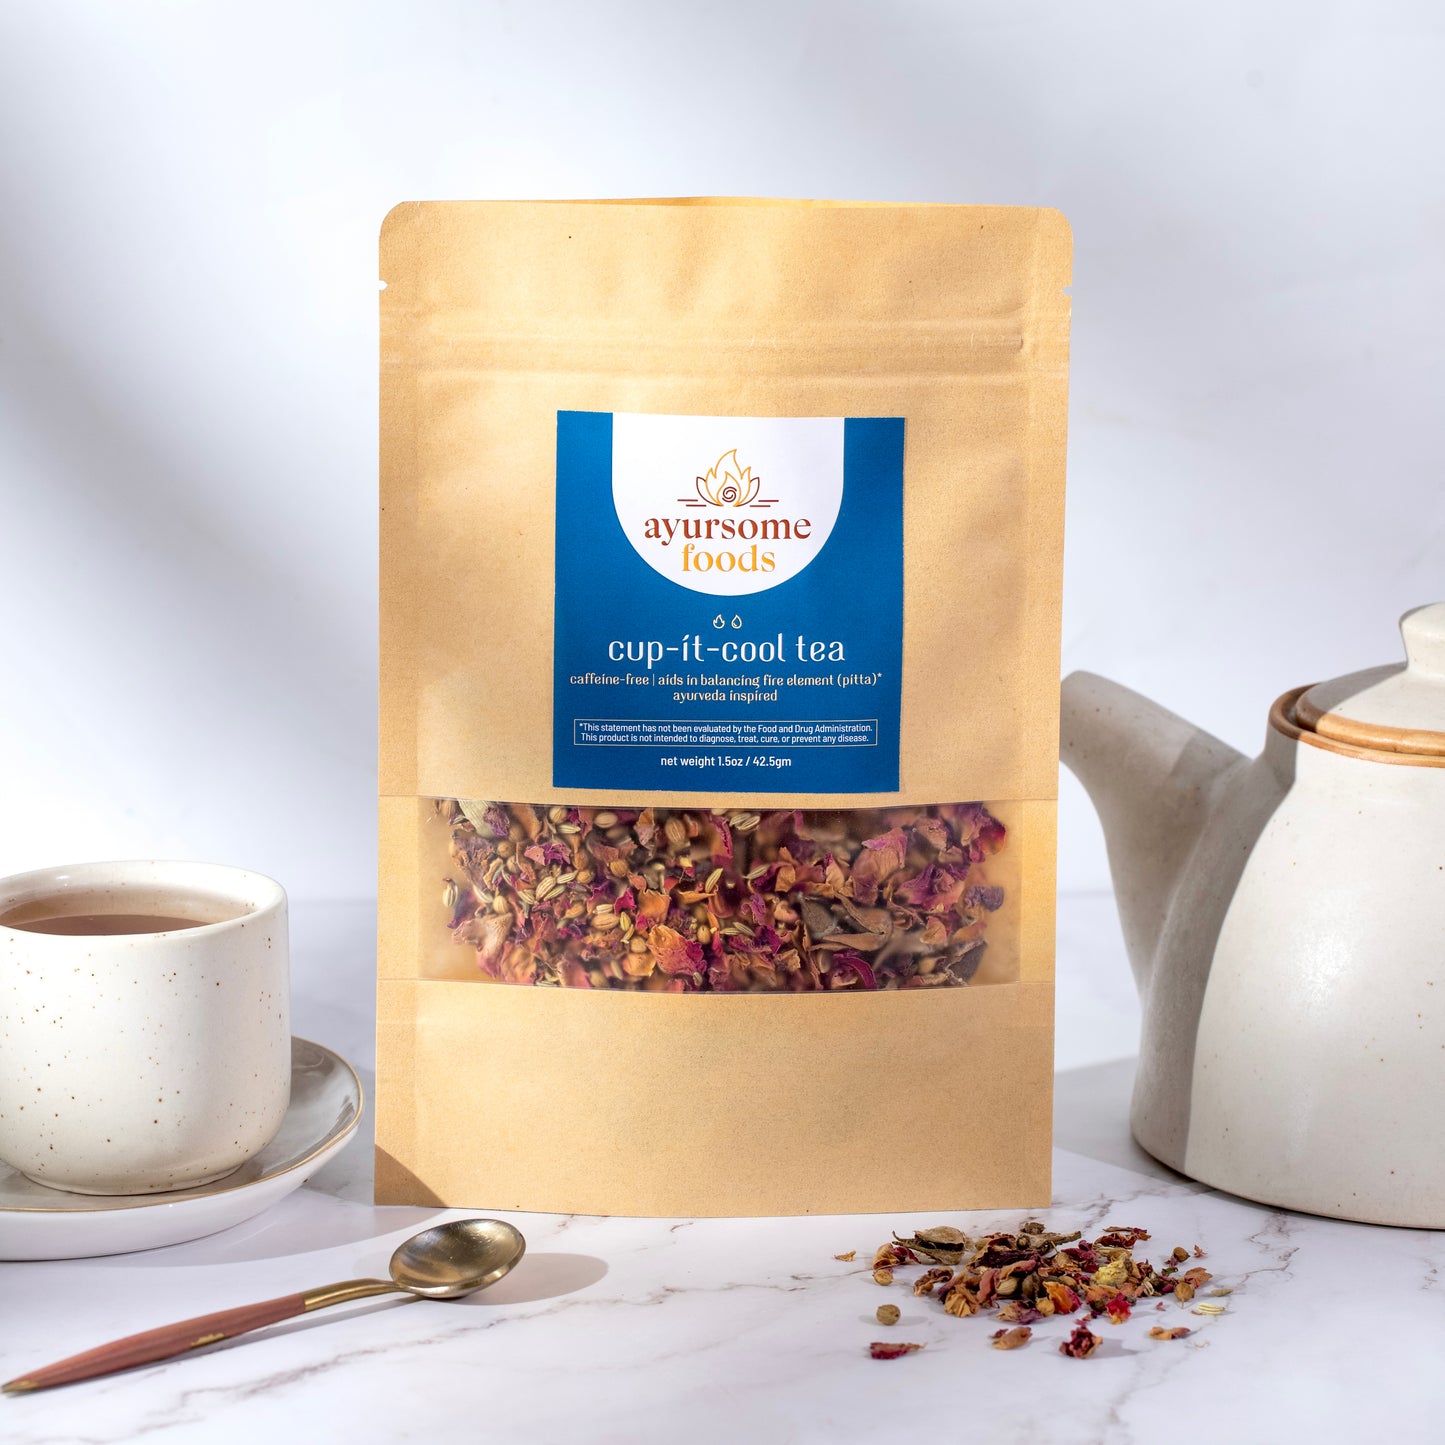 Ayurveda tea for Pitta Dosha that is great for acidity and relaxation. This herbal loose leaf tea is made with organic rose petals and is packed in a recyclable pack. The background is white and next to the loose leaf rose tea is a white kettle, organic tea ingredients, a cup of the brewed tea and a spoon.